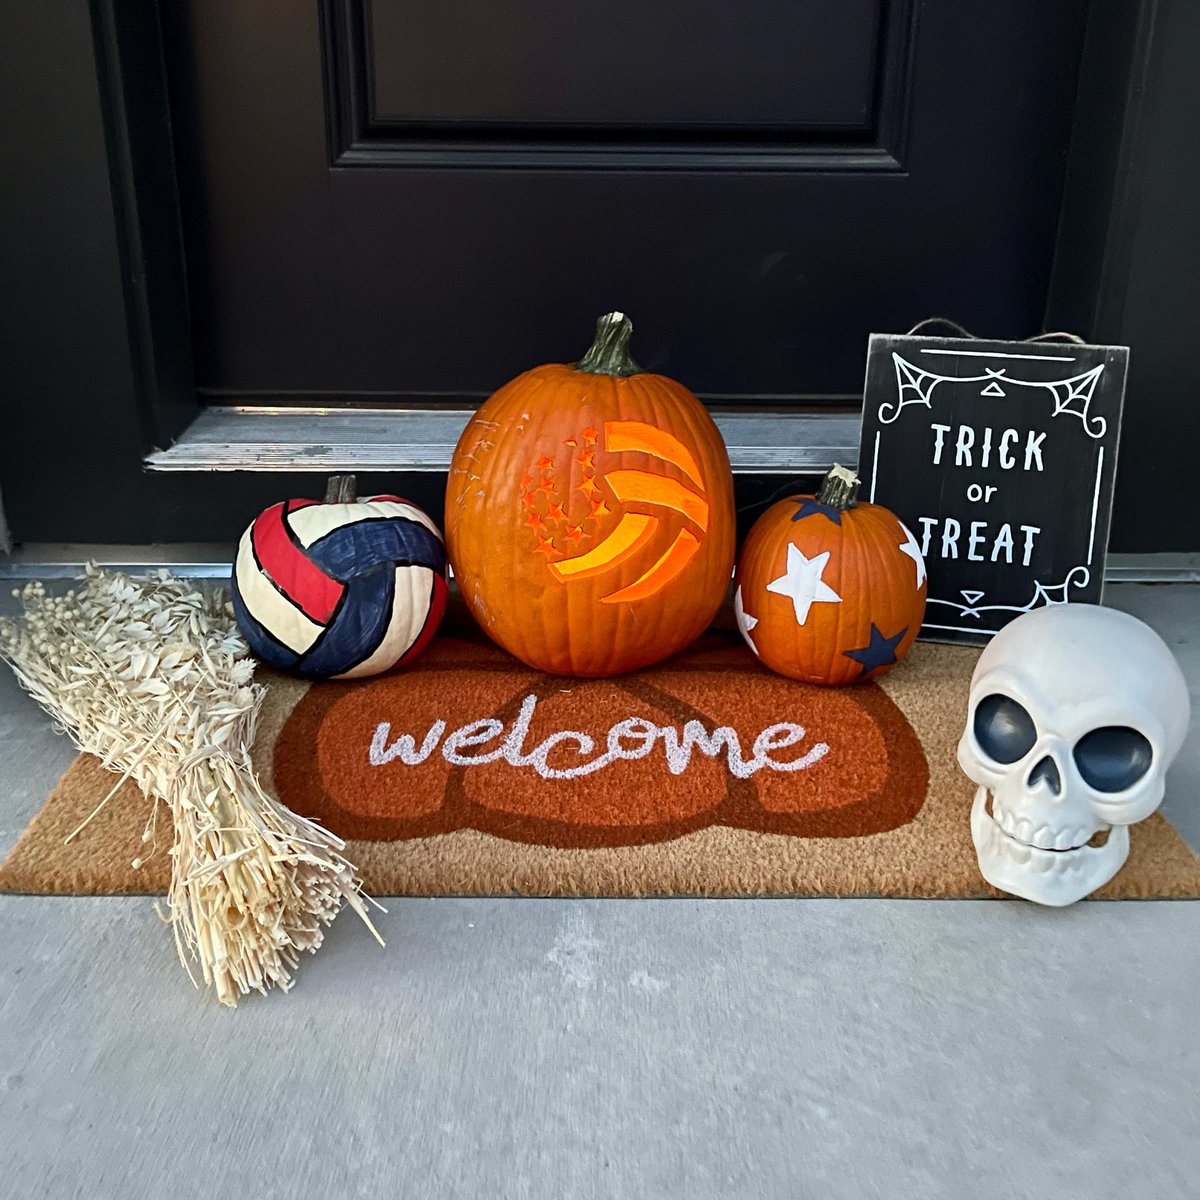 Two weeks until Halloween! Help us flood social media with volleyball themed pumpkins by posting your 🎃 masterpiece and use #volloween and tag us. We will be sharing our favorites through the end of October so get creative! #Halloween #pumpkin #jackolantern #volleyball